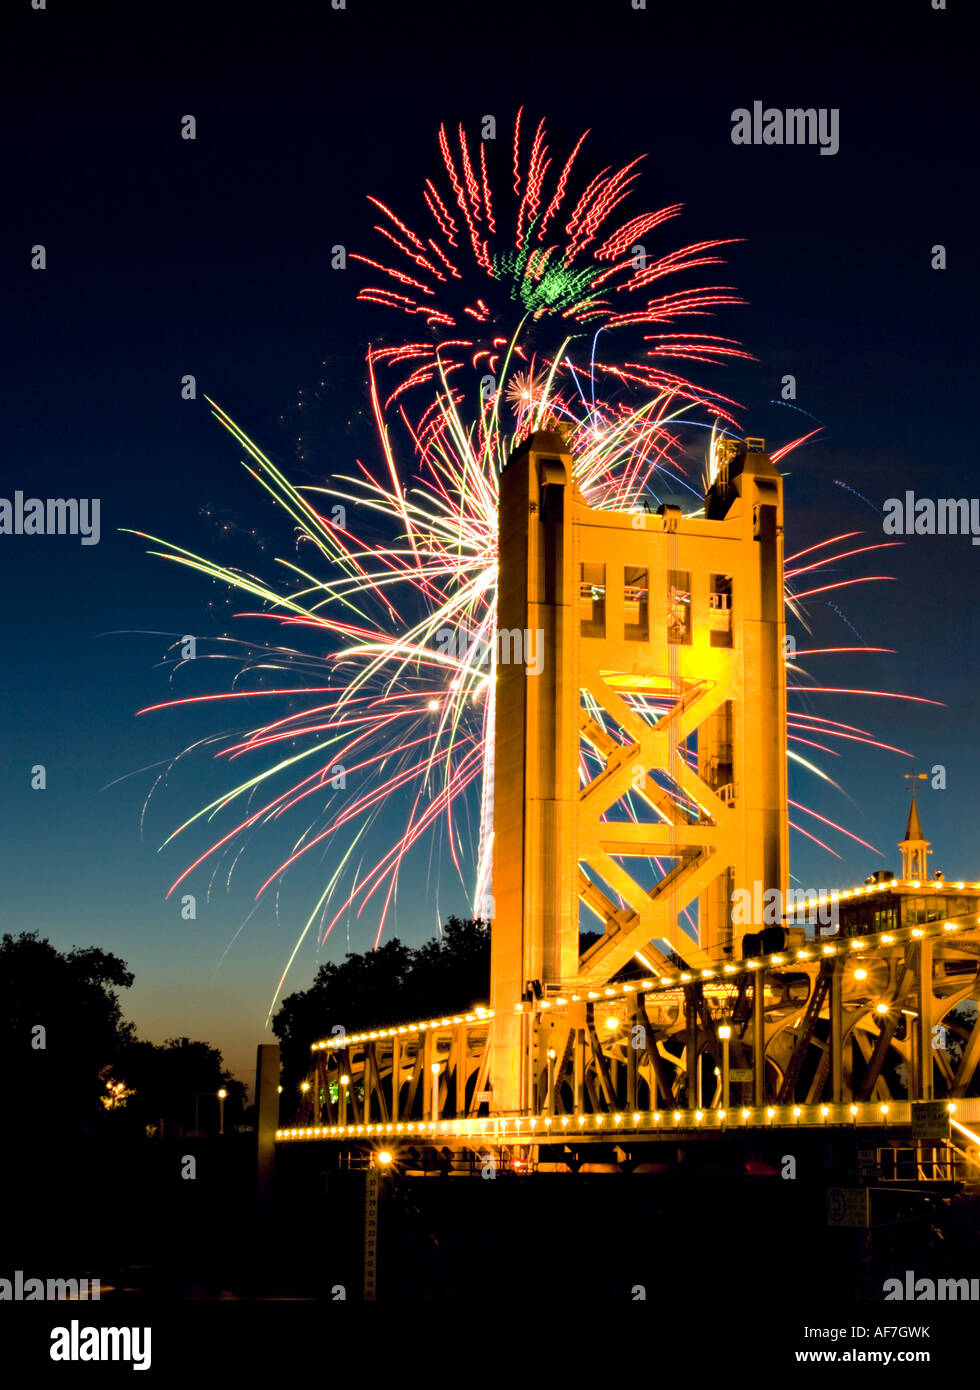 Fourth of July fireworks exploded behind the tower bridge in Sacramento